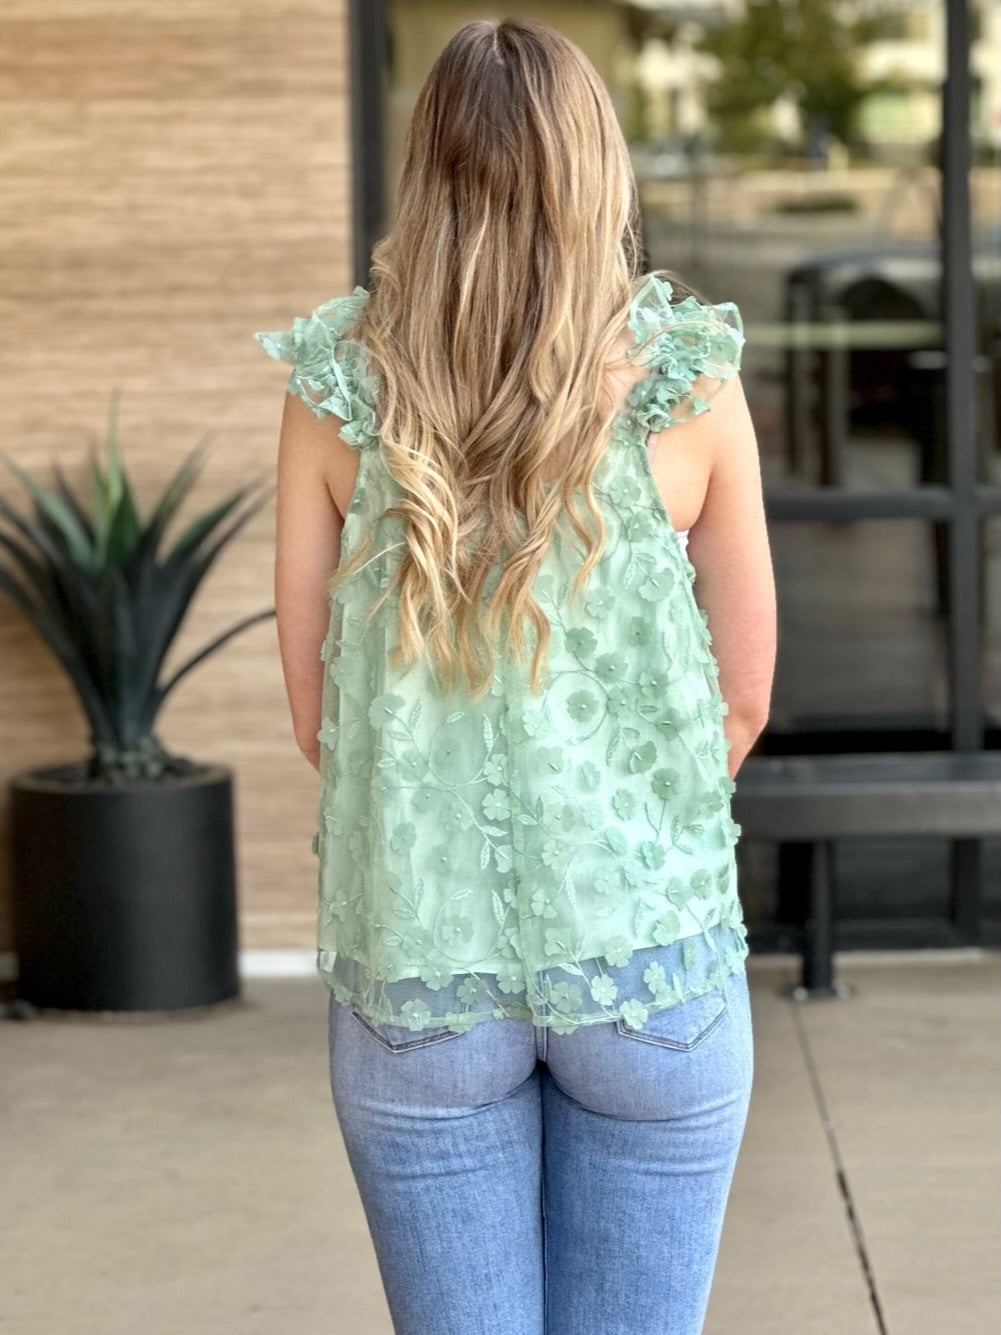 Lexi in floral tank top back view